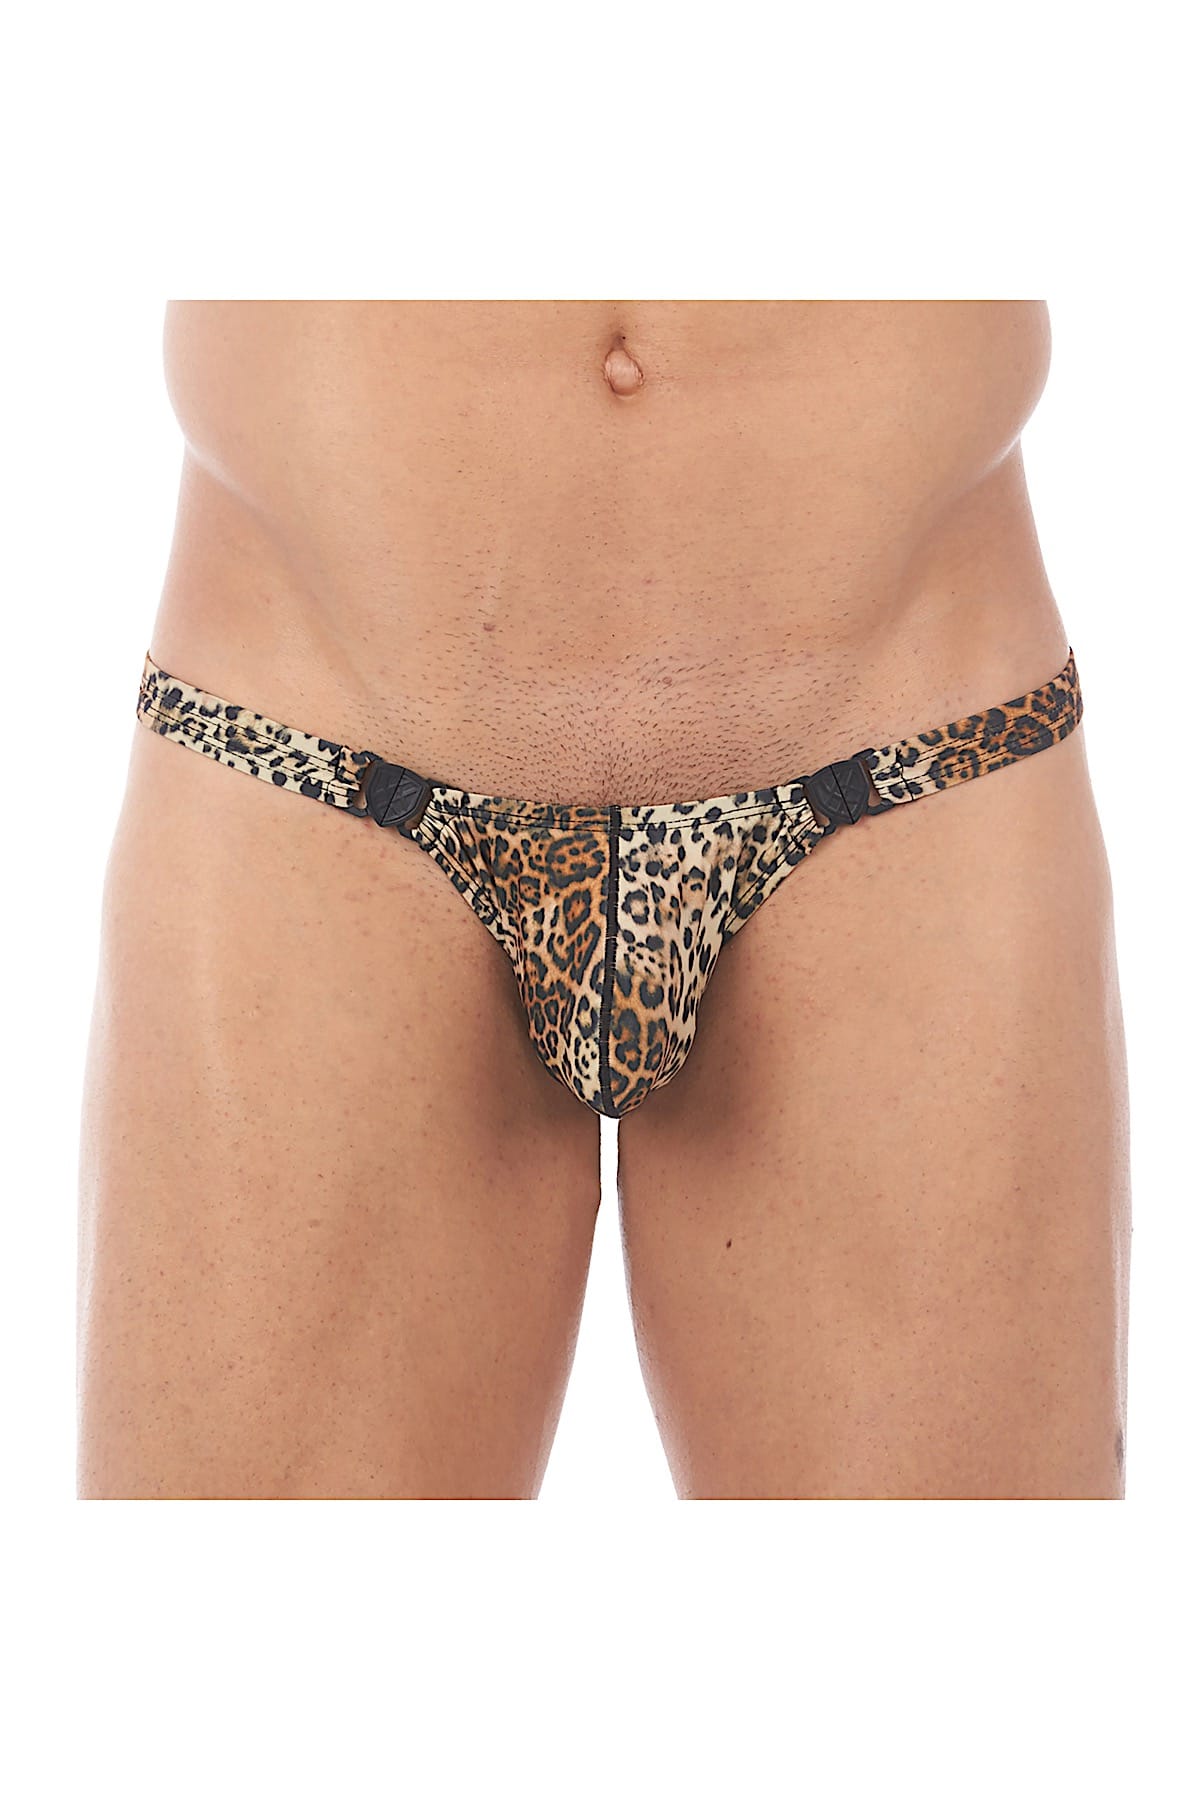 Gregg Homme Natural Desire Snap-Away Thong